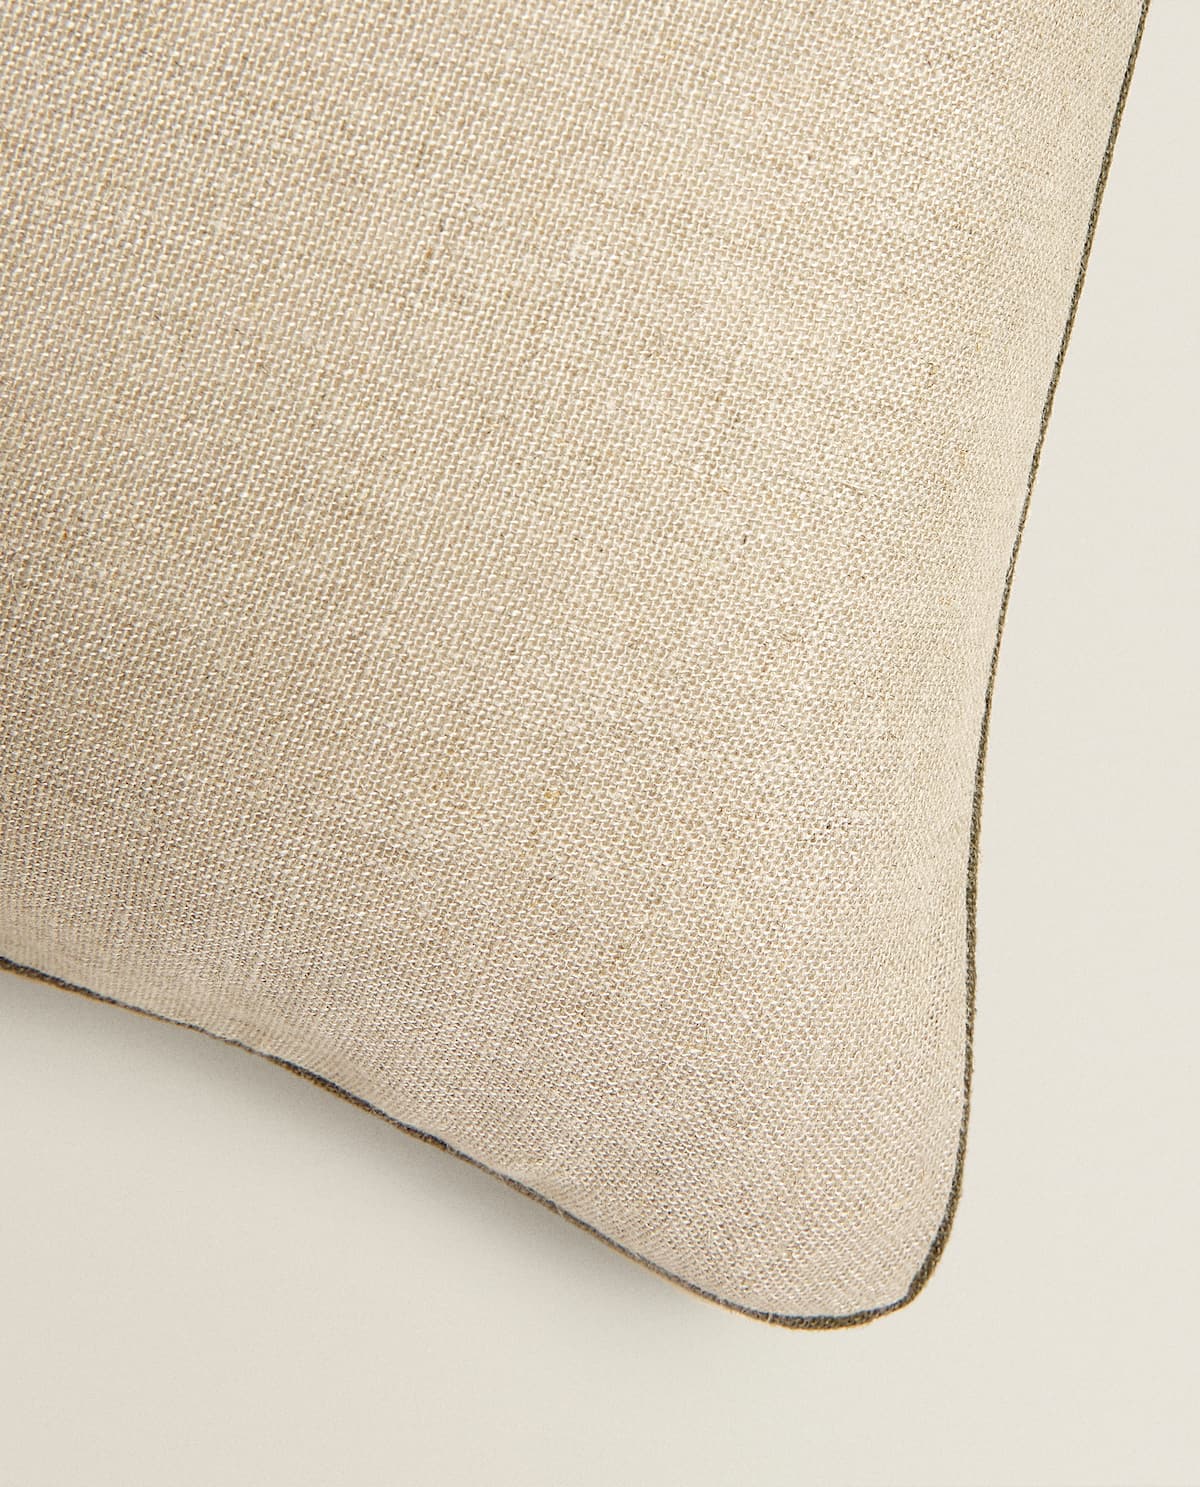 Washed linen throw pillow from Zara Home